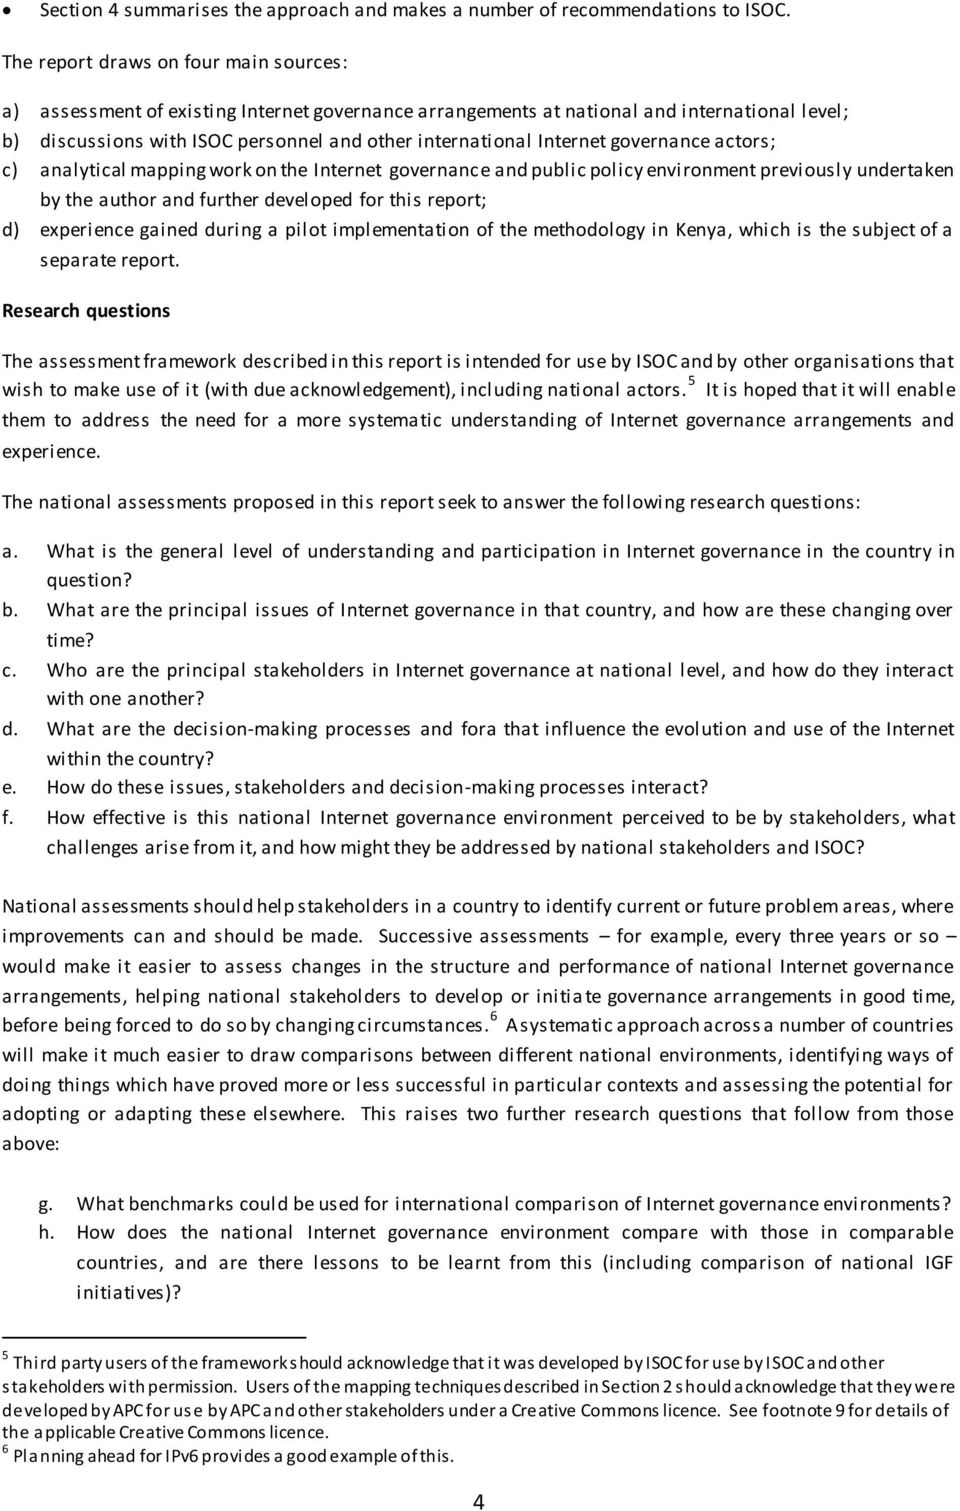 Internet governance actors; c) analytical mapping work on the Internet governance and public policy environment previously undertaken by the author and further developed for this report; d)